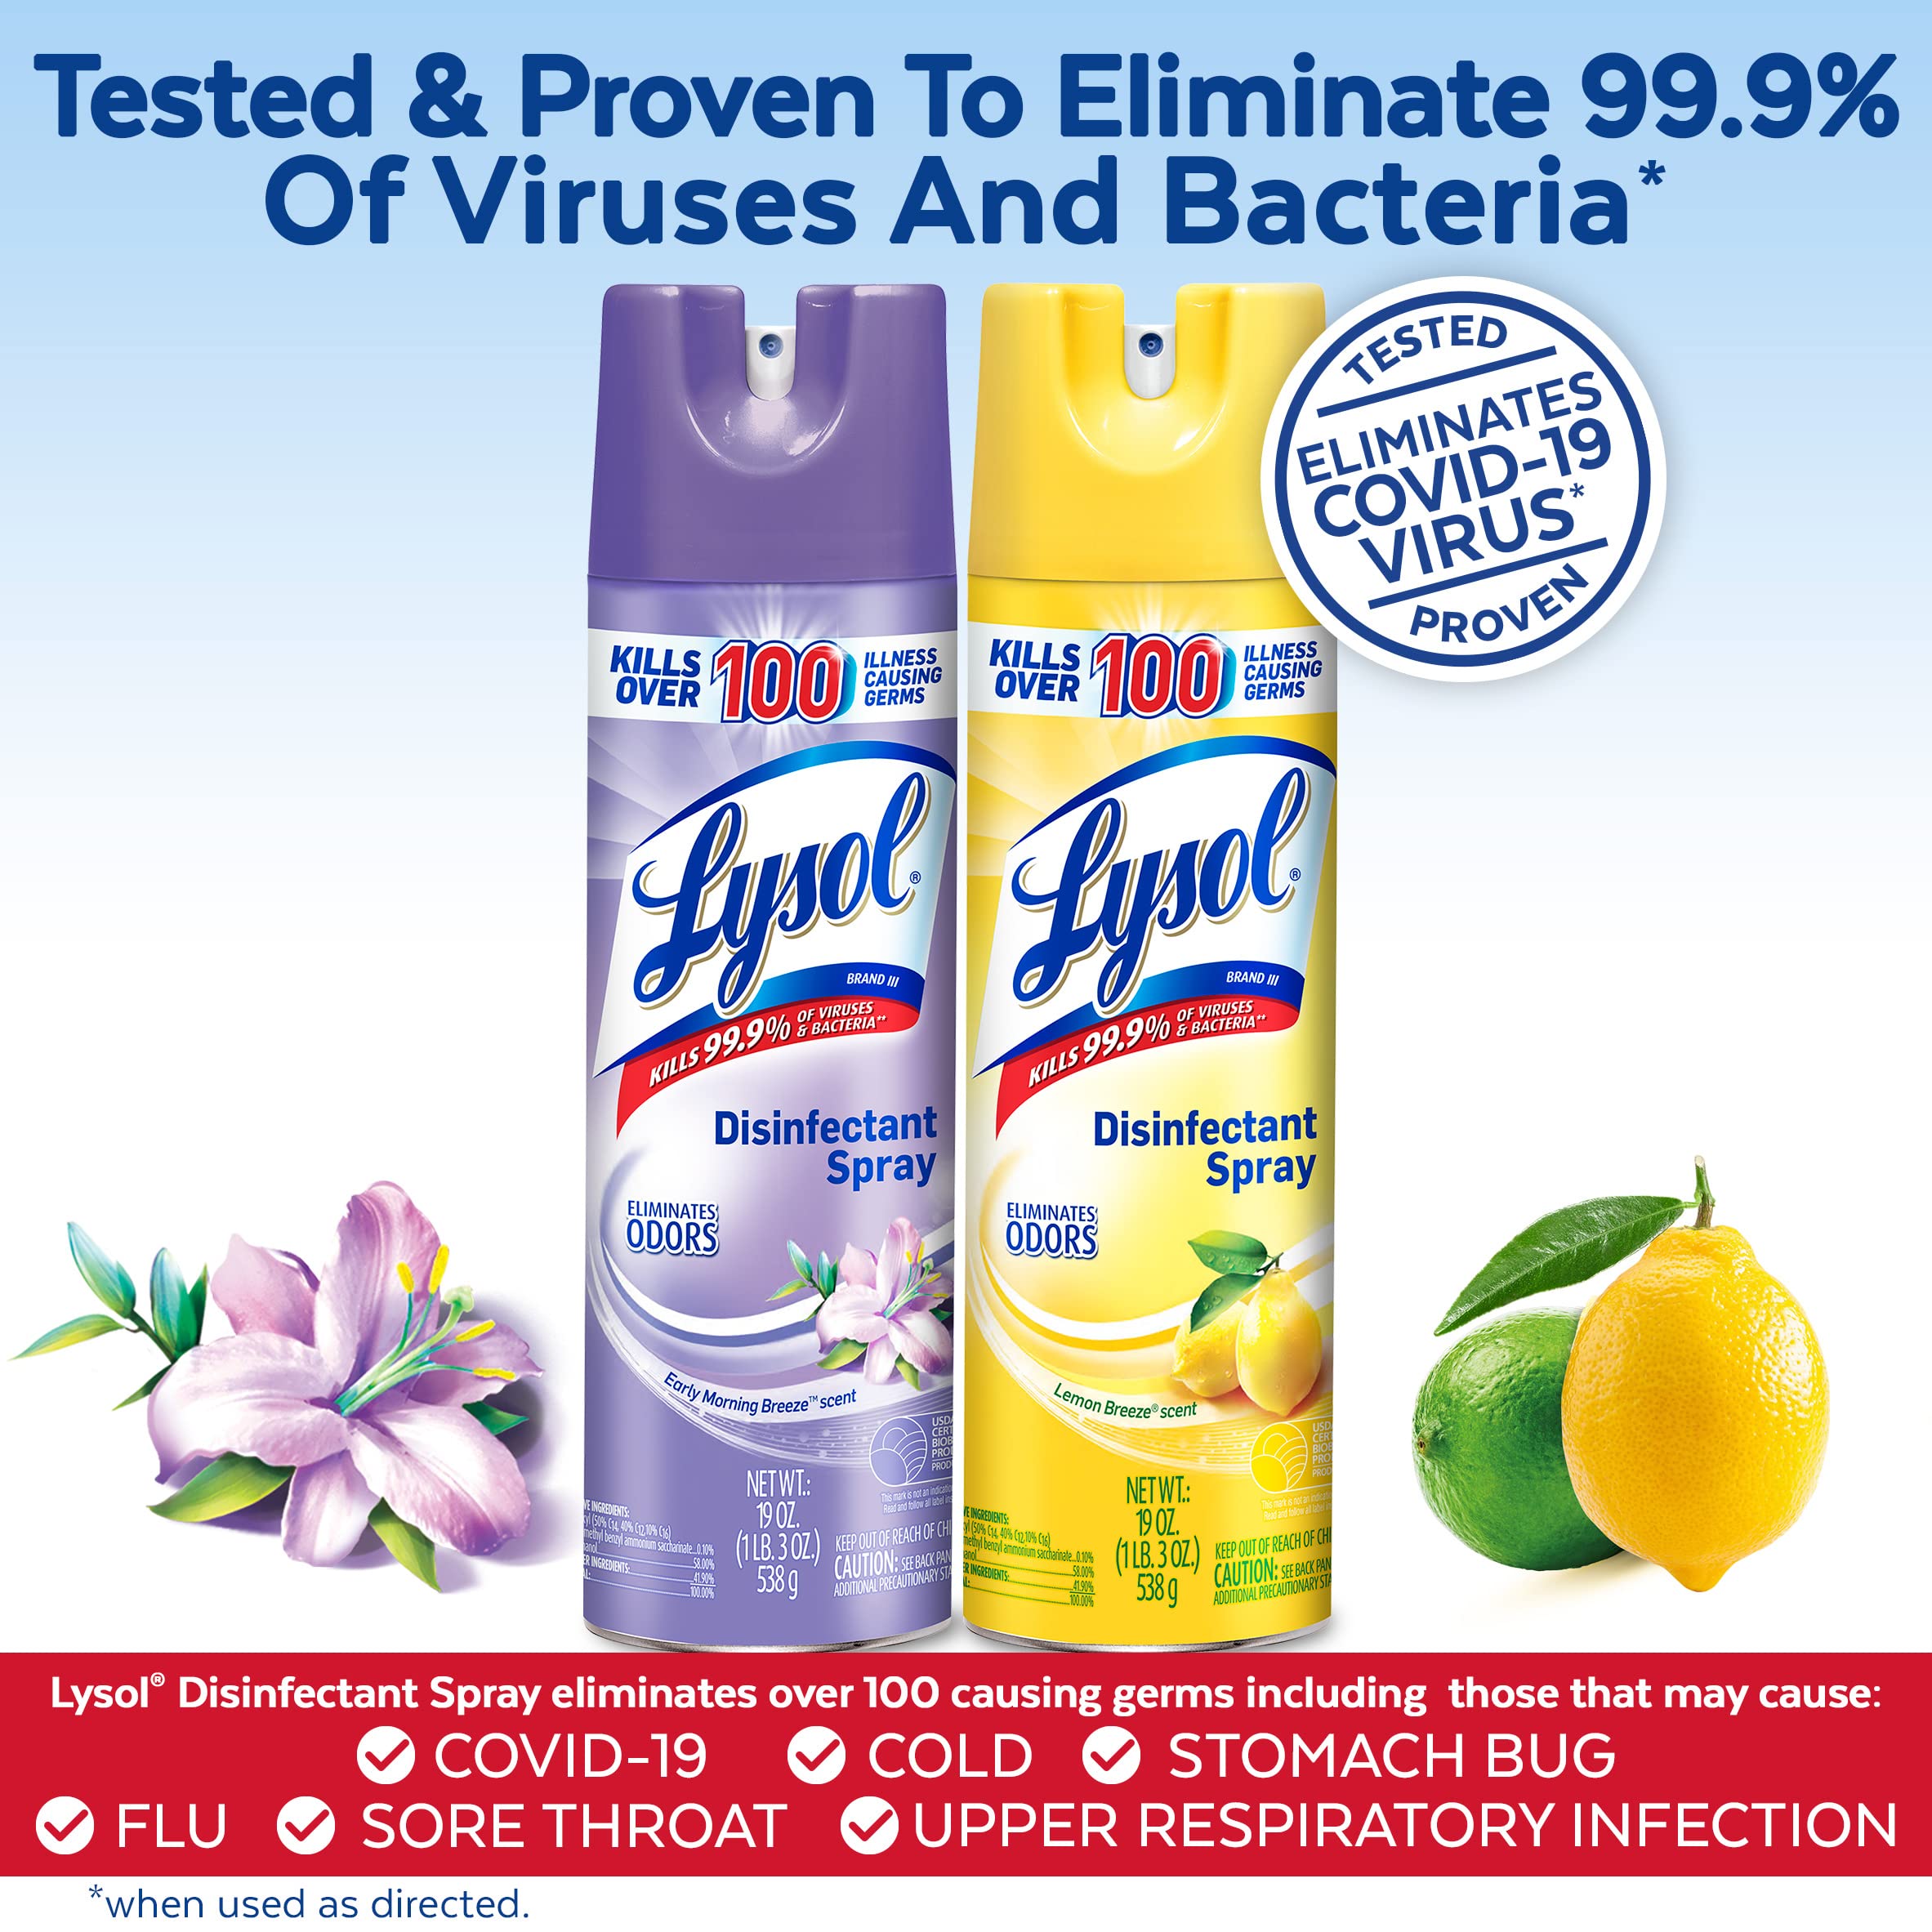 Lysol Disinfectant Spray Bundle, Sanitizing And Antibacterial Spray, For Disinfecting And Deodorizing, contains x2 Lemon Breeze 19 Fl Oz and x2 Early Morning Breeze, 19 Fl Oz, Packaging May Vary